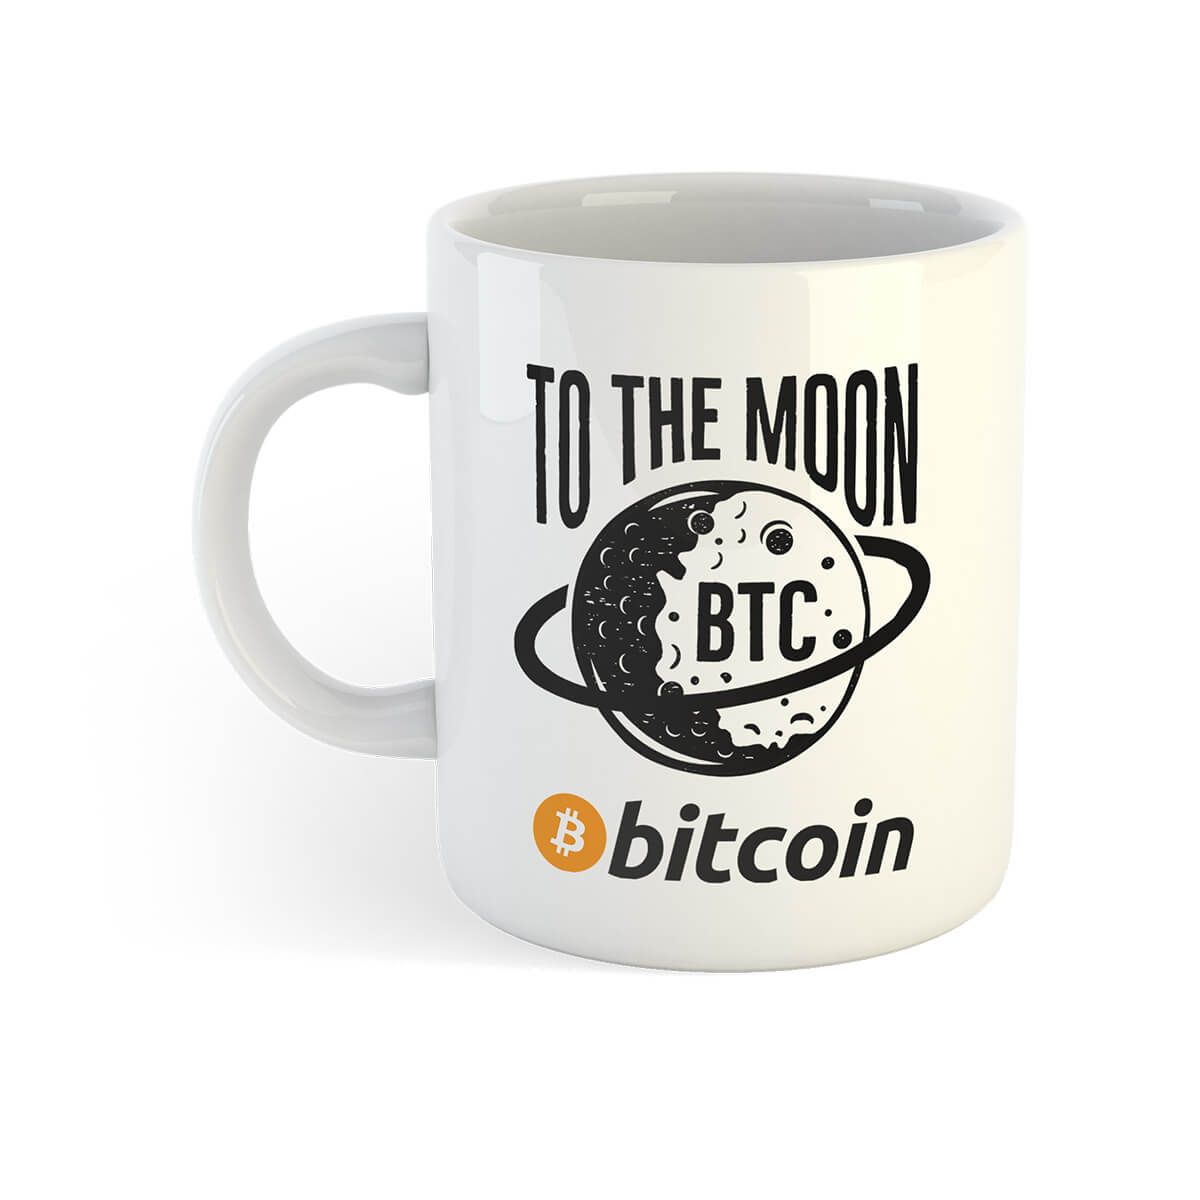 safely to the moon crypto currency